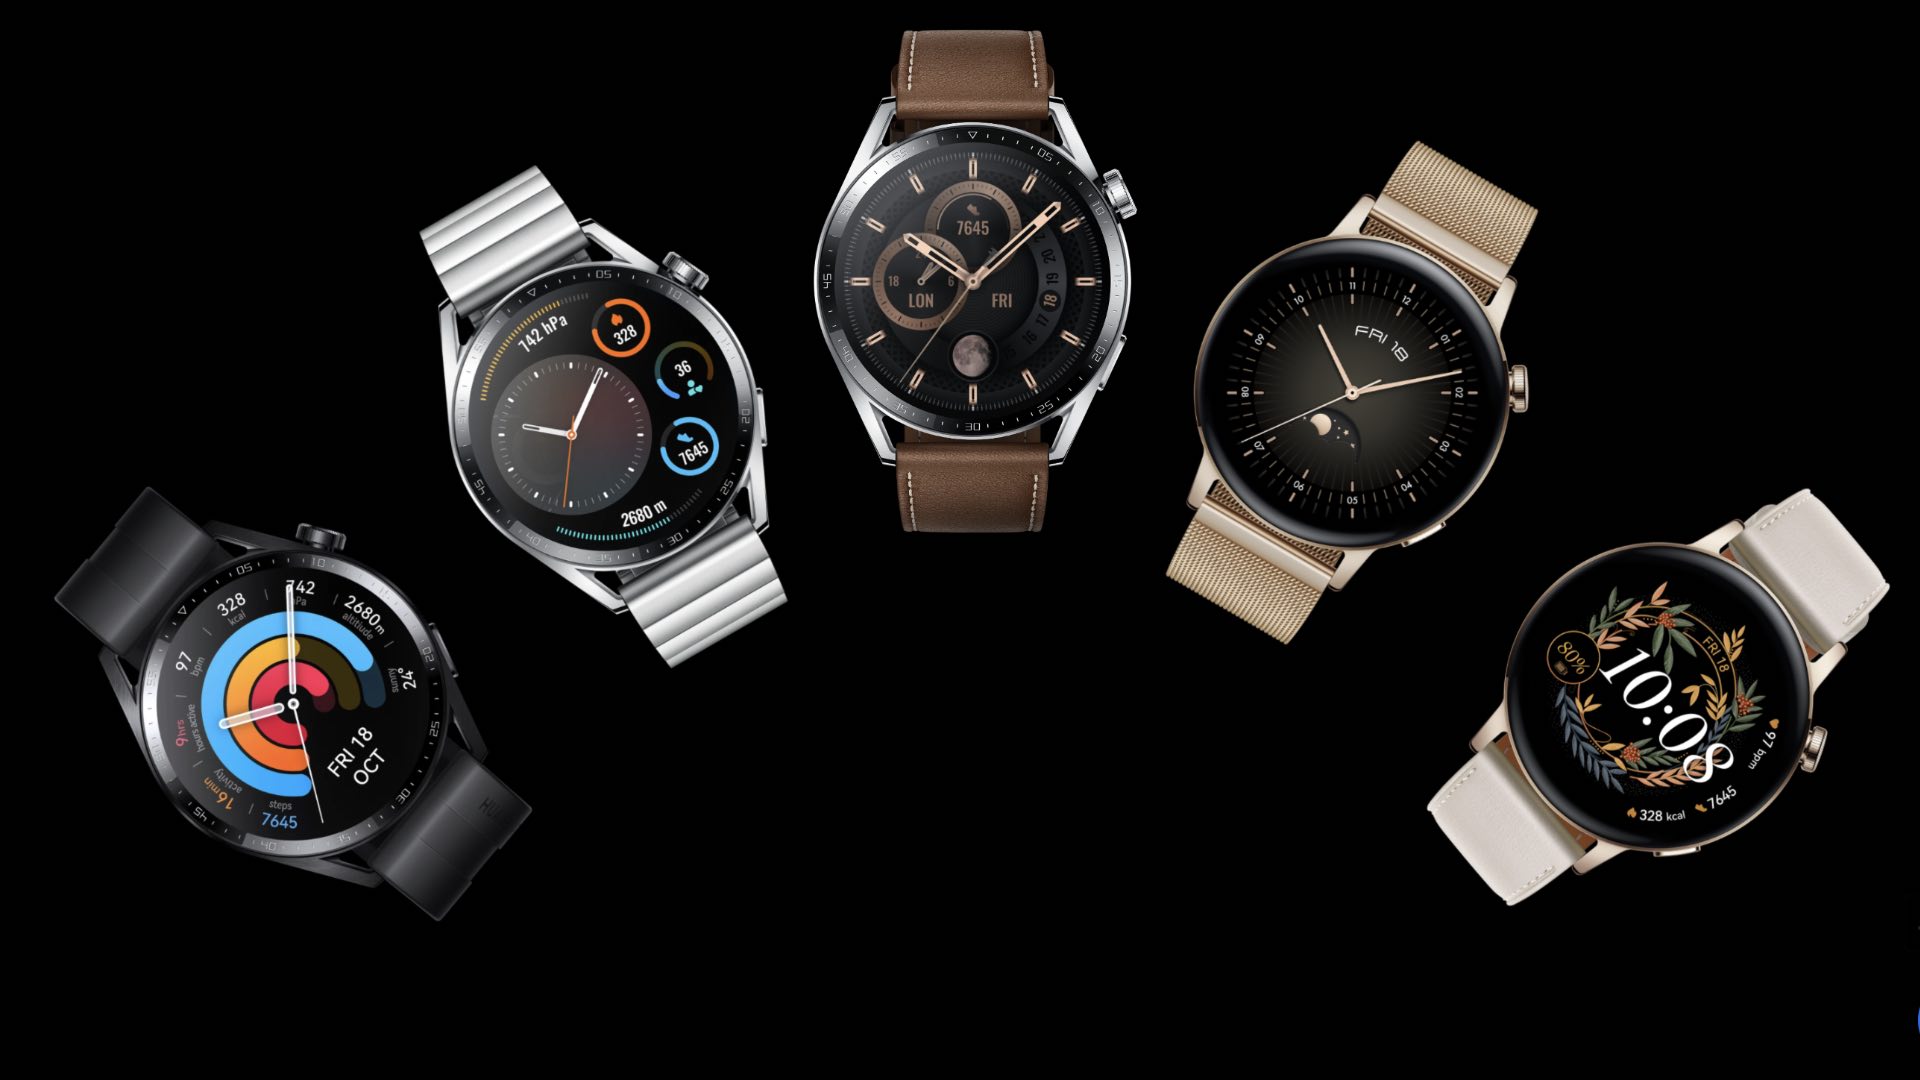 http://Huawei%20Watch%20GT%203%2046%20mm%20Classic%20Brown%20Leather%20|%20Huawei%20Store